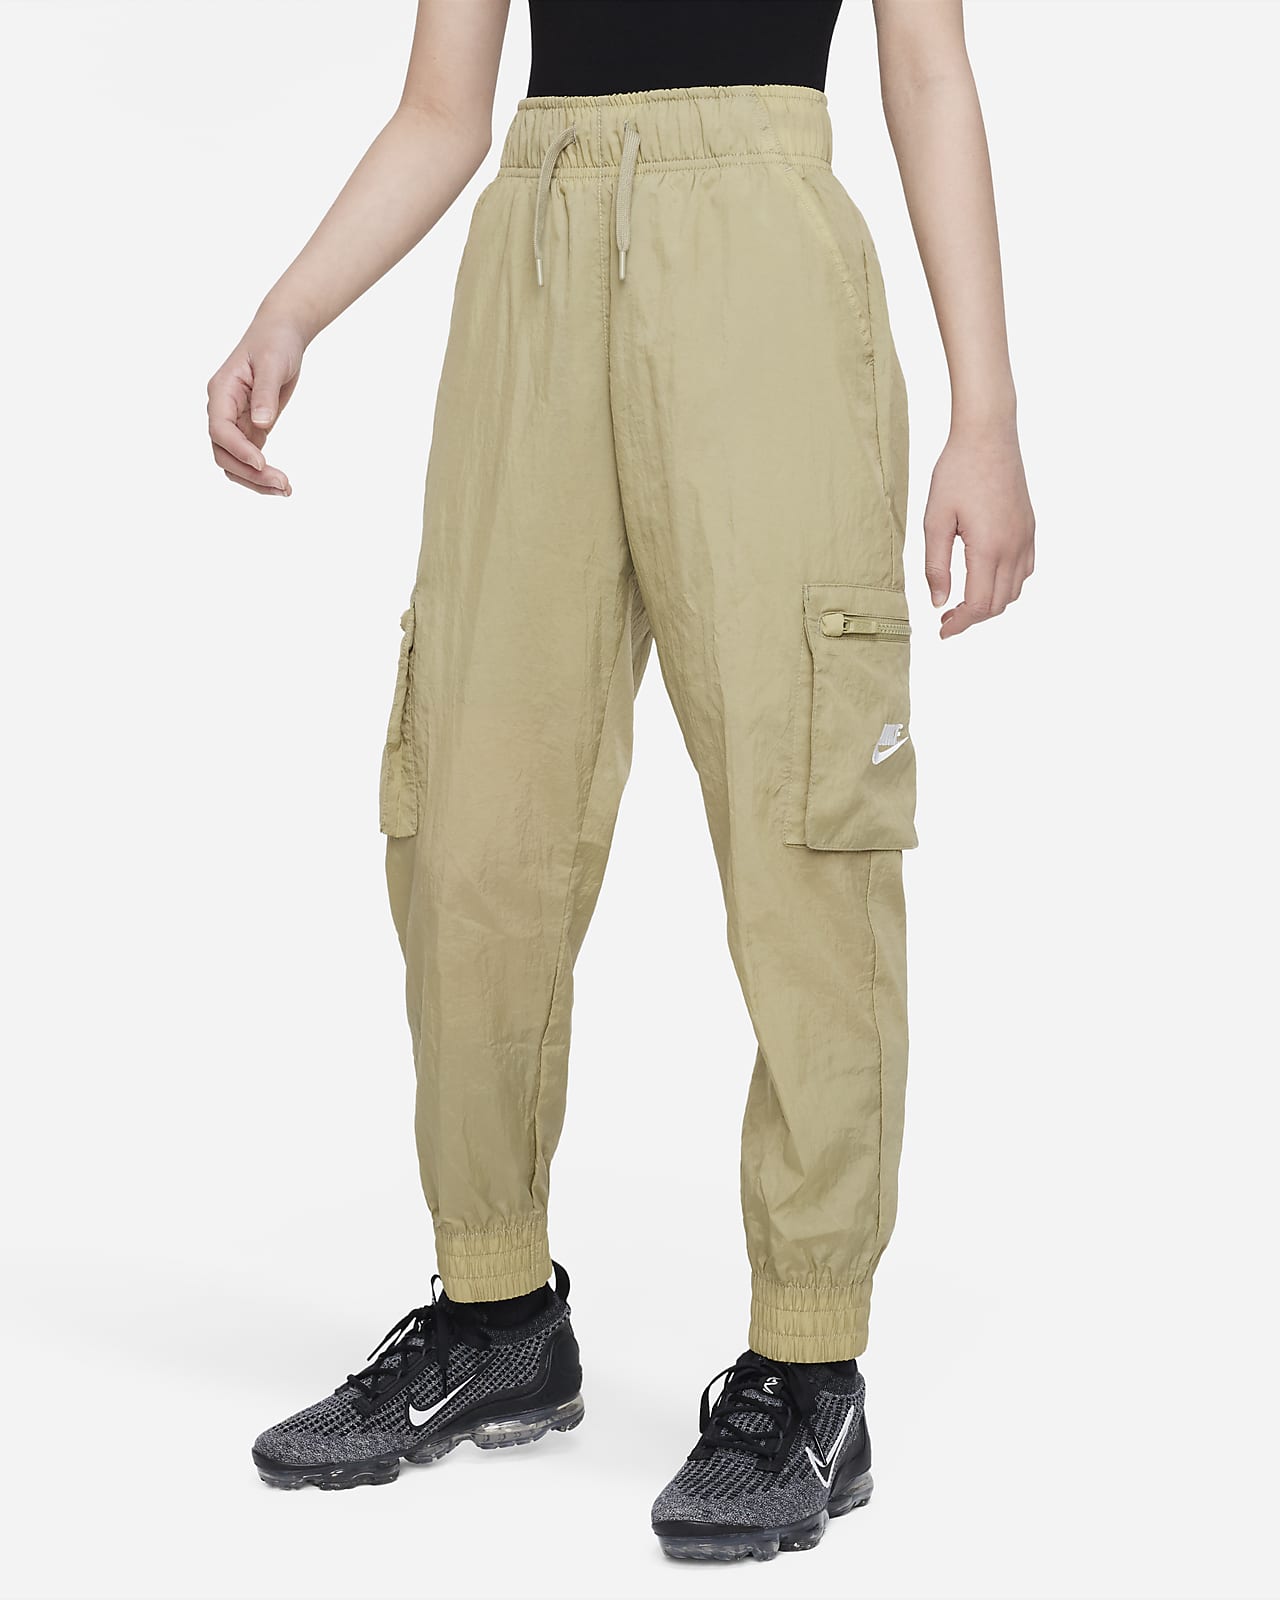 Loose Twill Cargo Pants for Girls | Old Navy-saigonsouth.com.vn